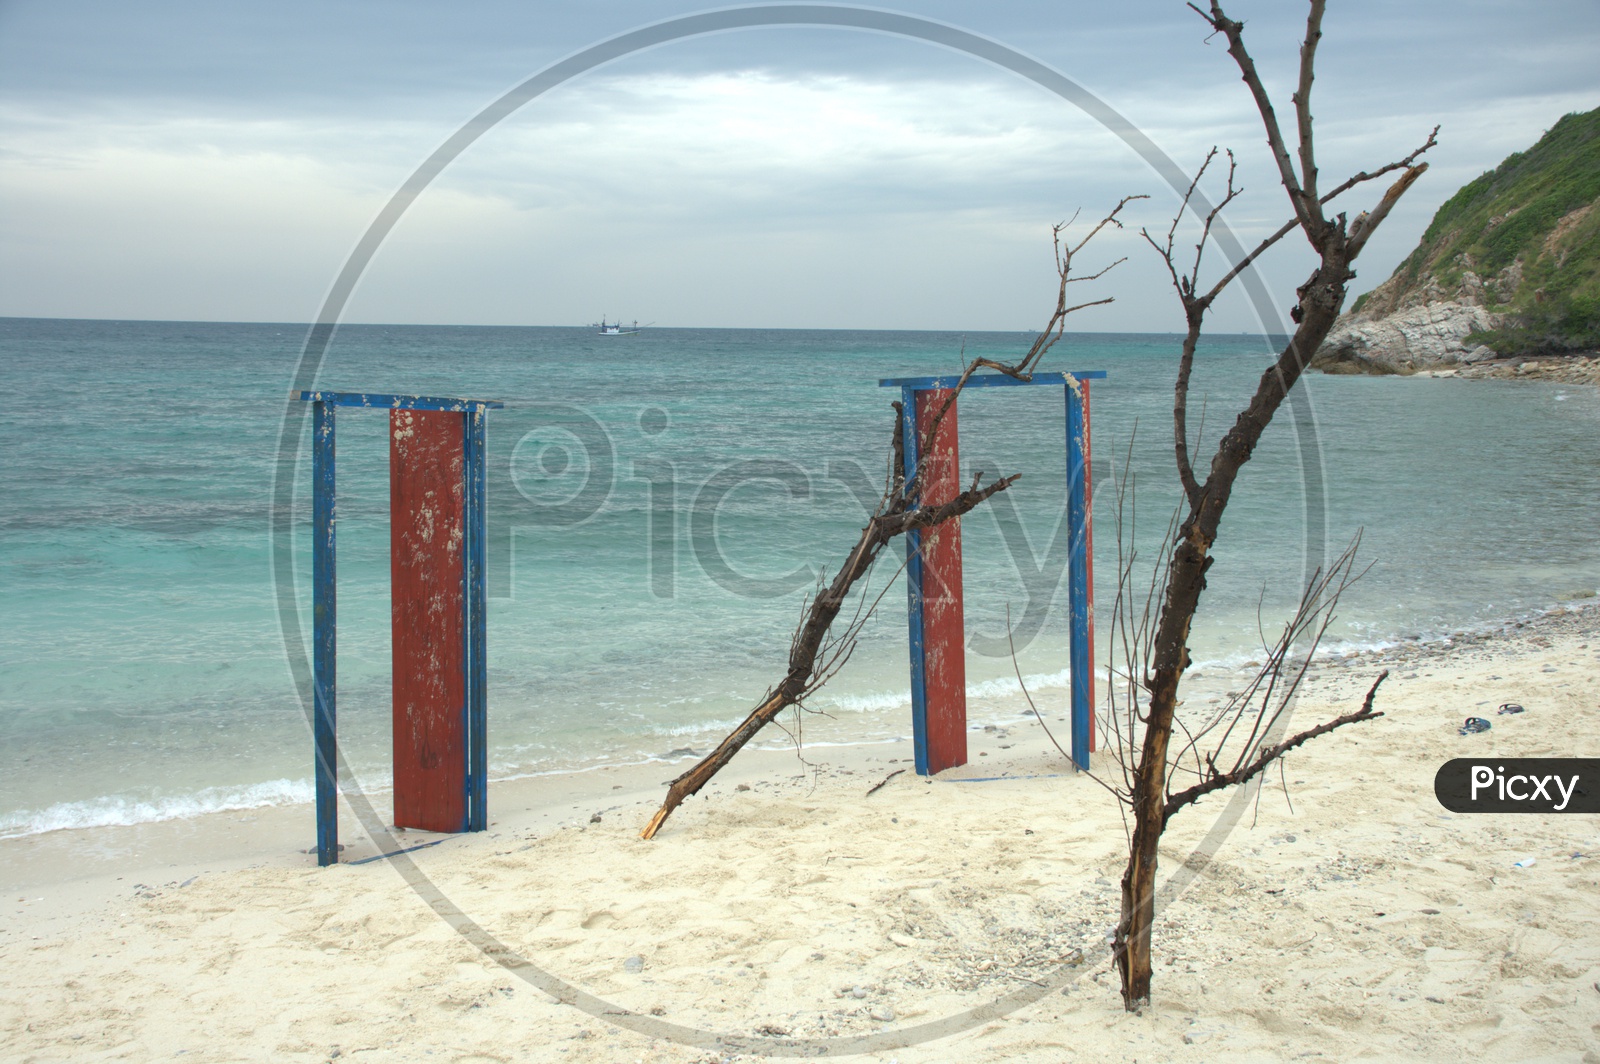 Wooden doors on the beach side